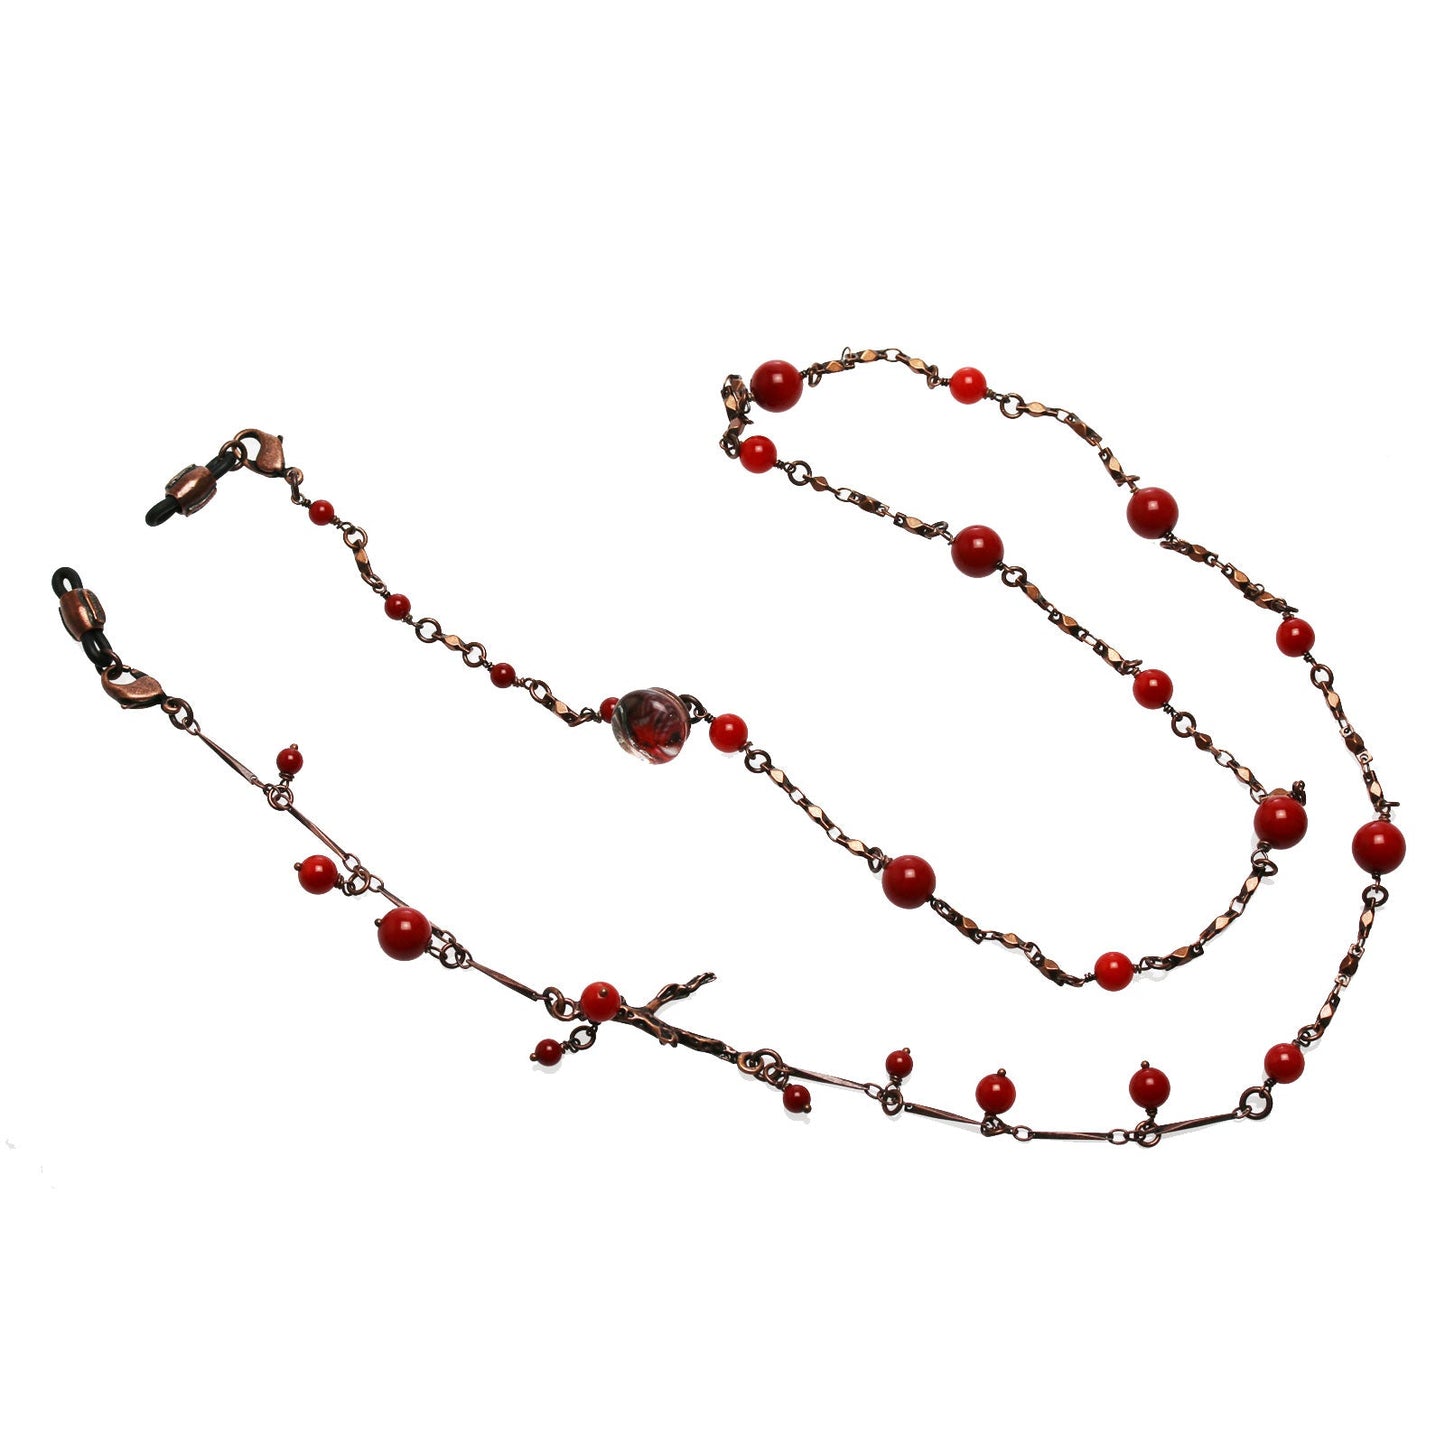 Eyeglasses Chain Necklace Coral Red Lily TAMARUSAN